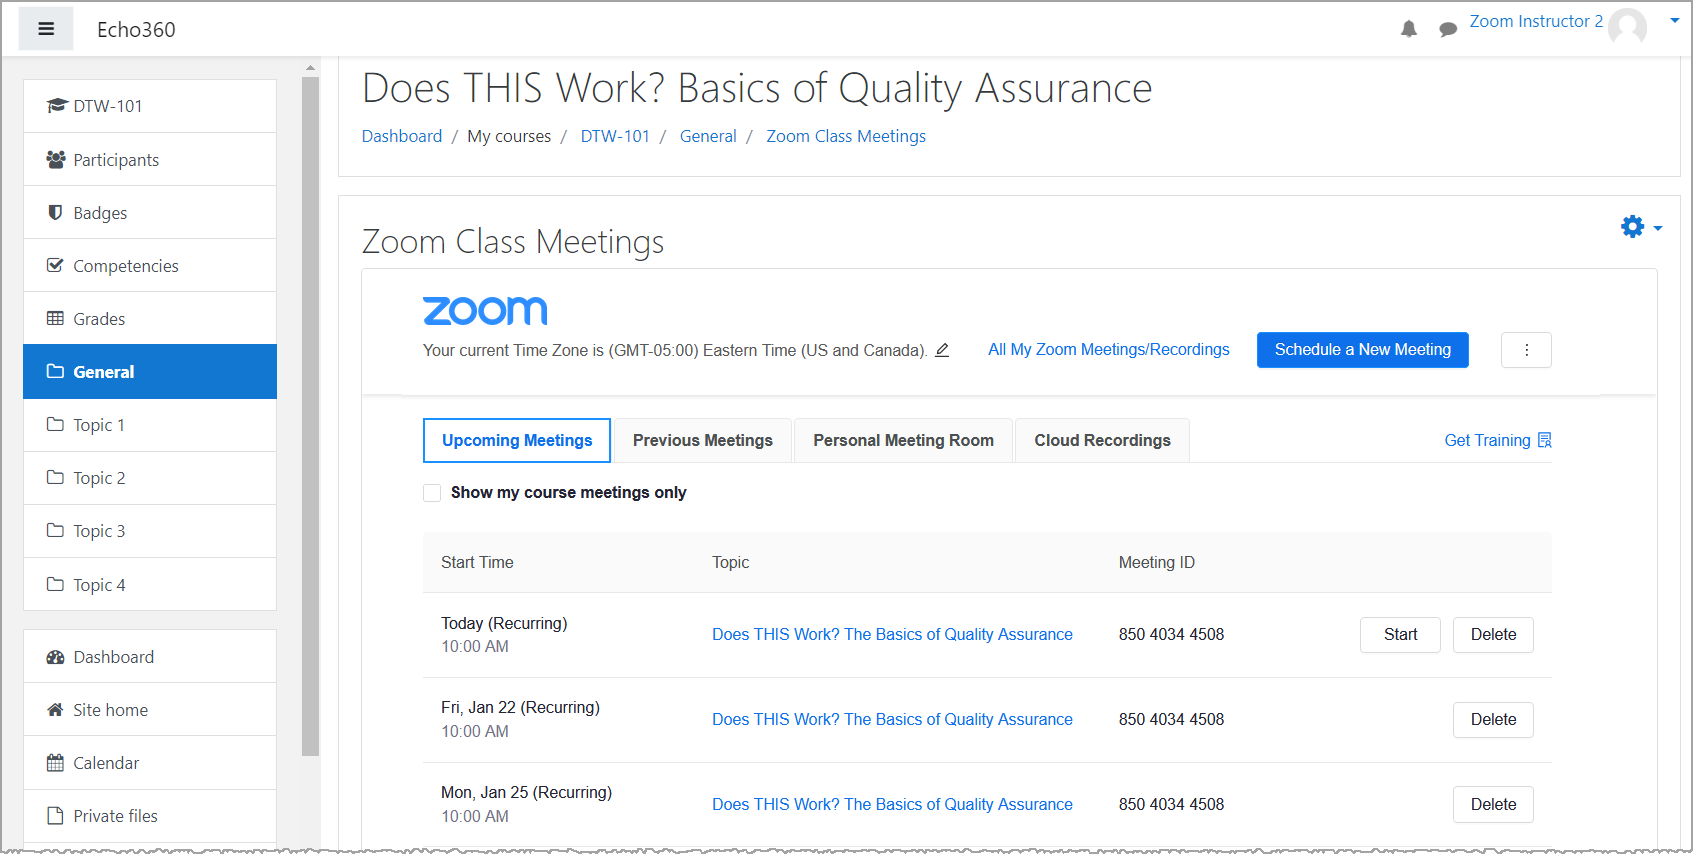 Zoom course meeting list in Moodle with new course meetings shown as described